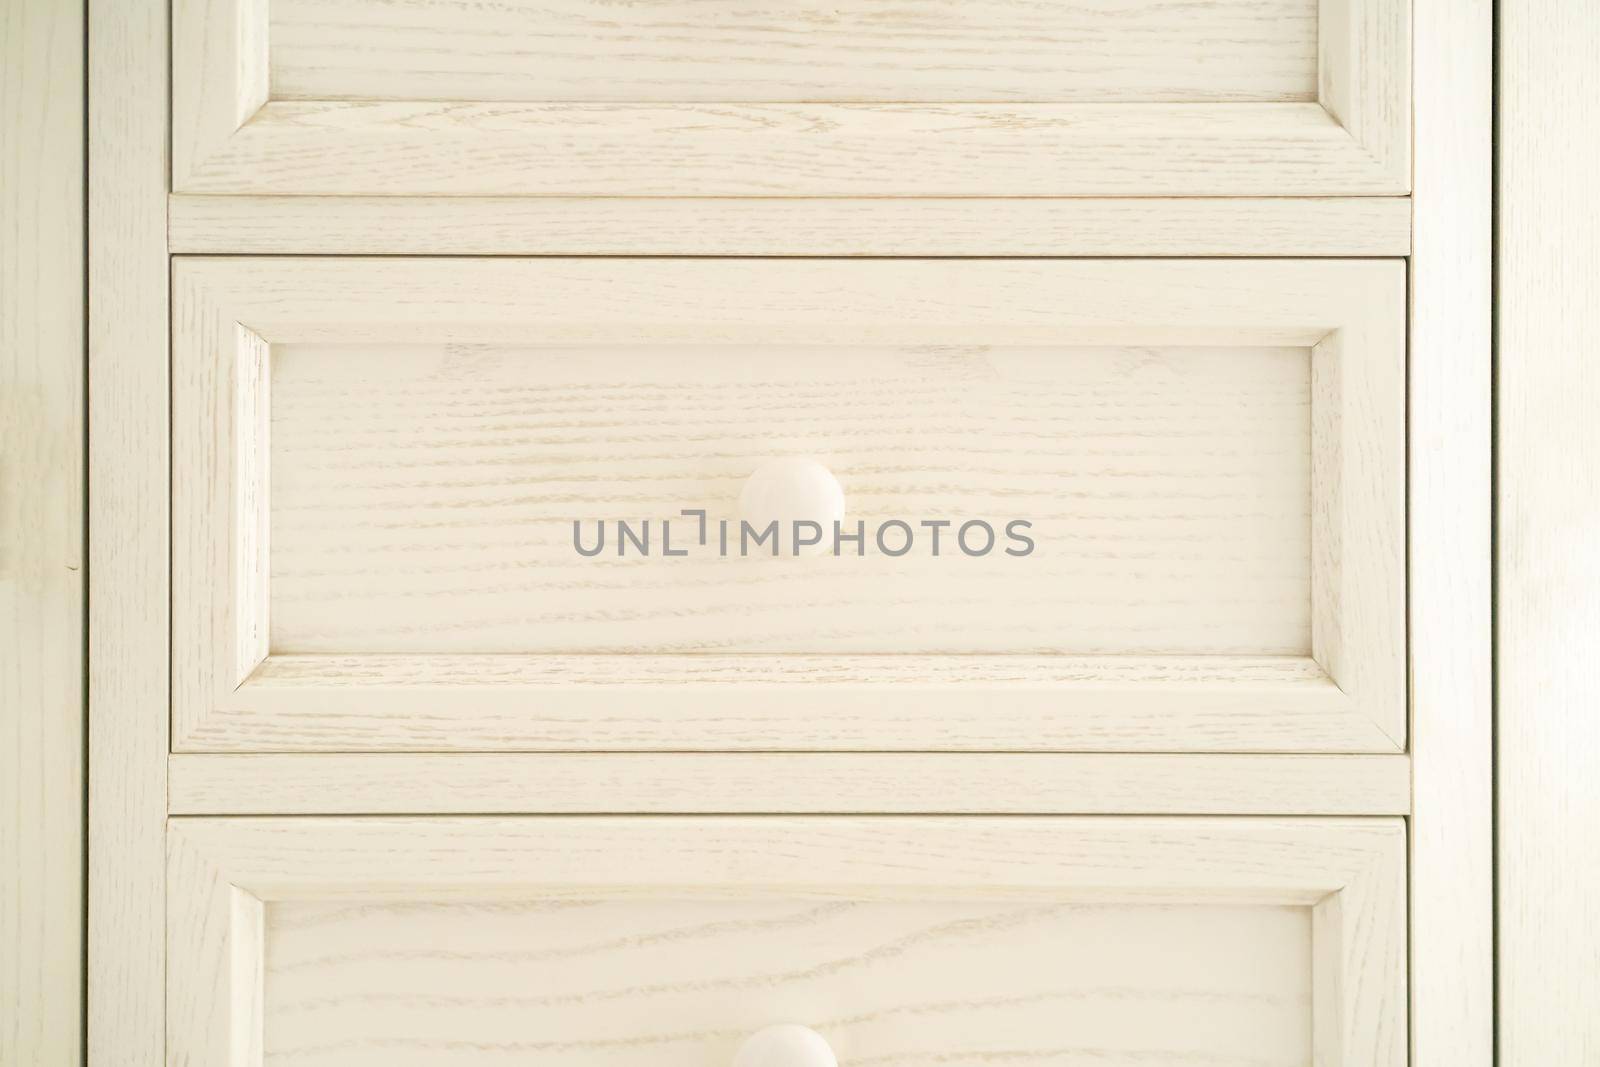 Vintage beautiful restored wooden chest of drawers, painted white, with round door handles. Wardrobe in Provence style.